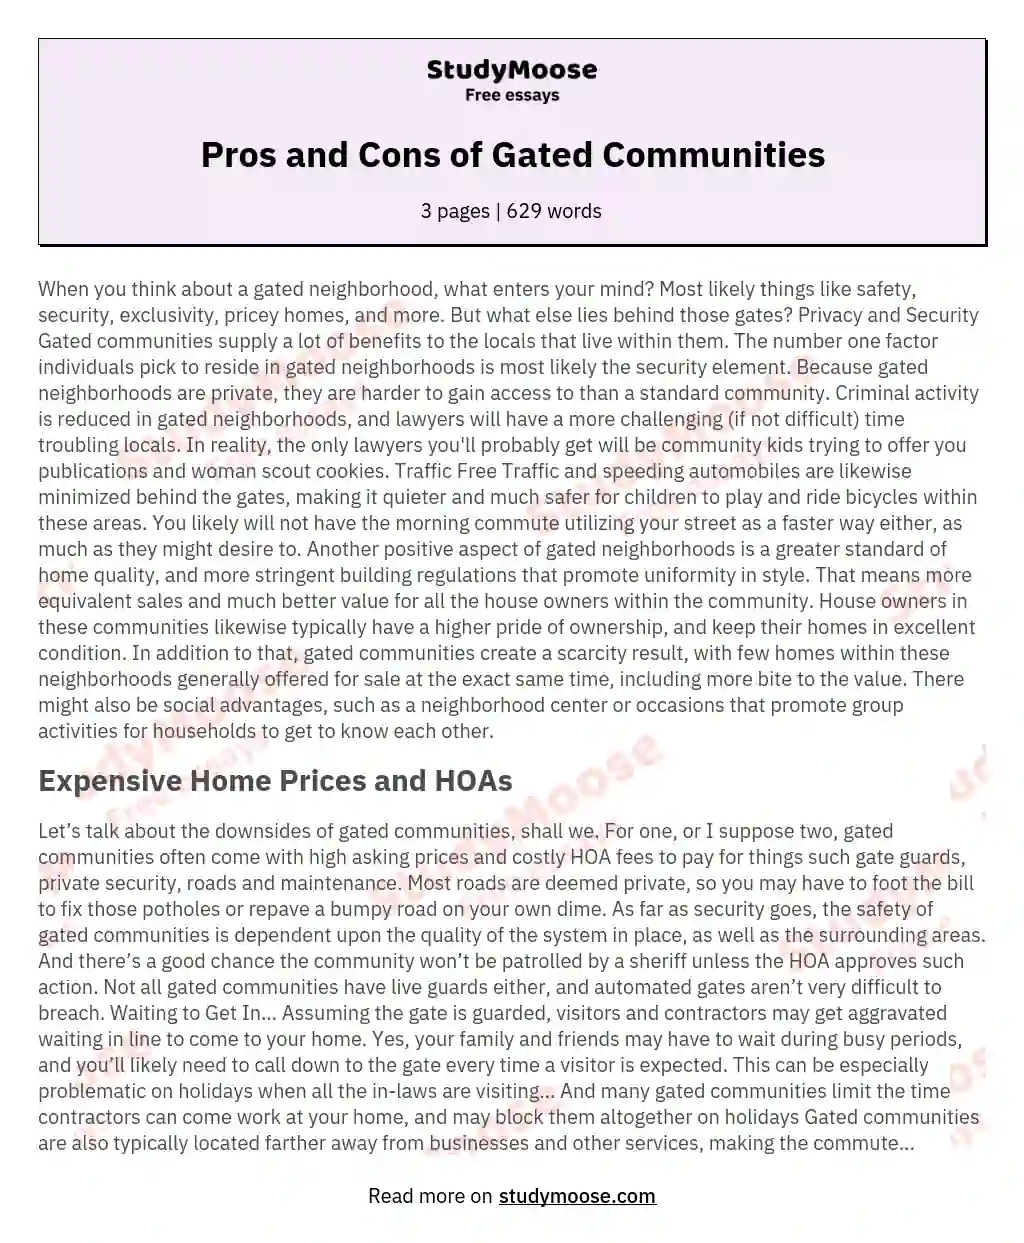 Pros and Cons of Gated Communities